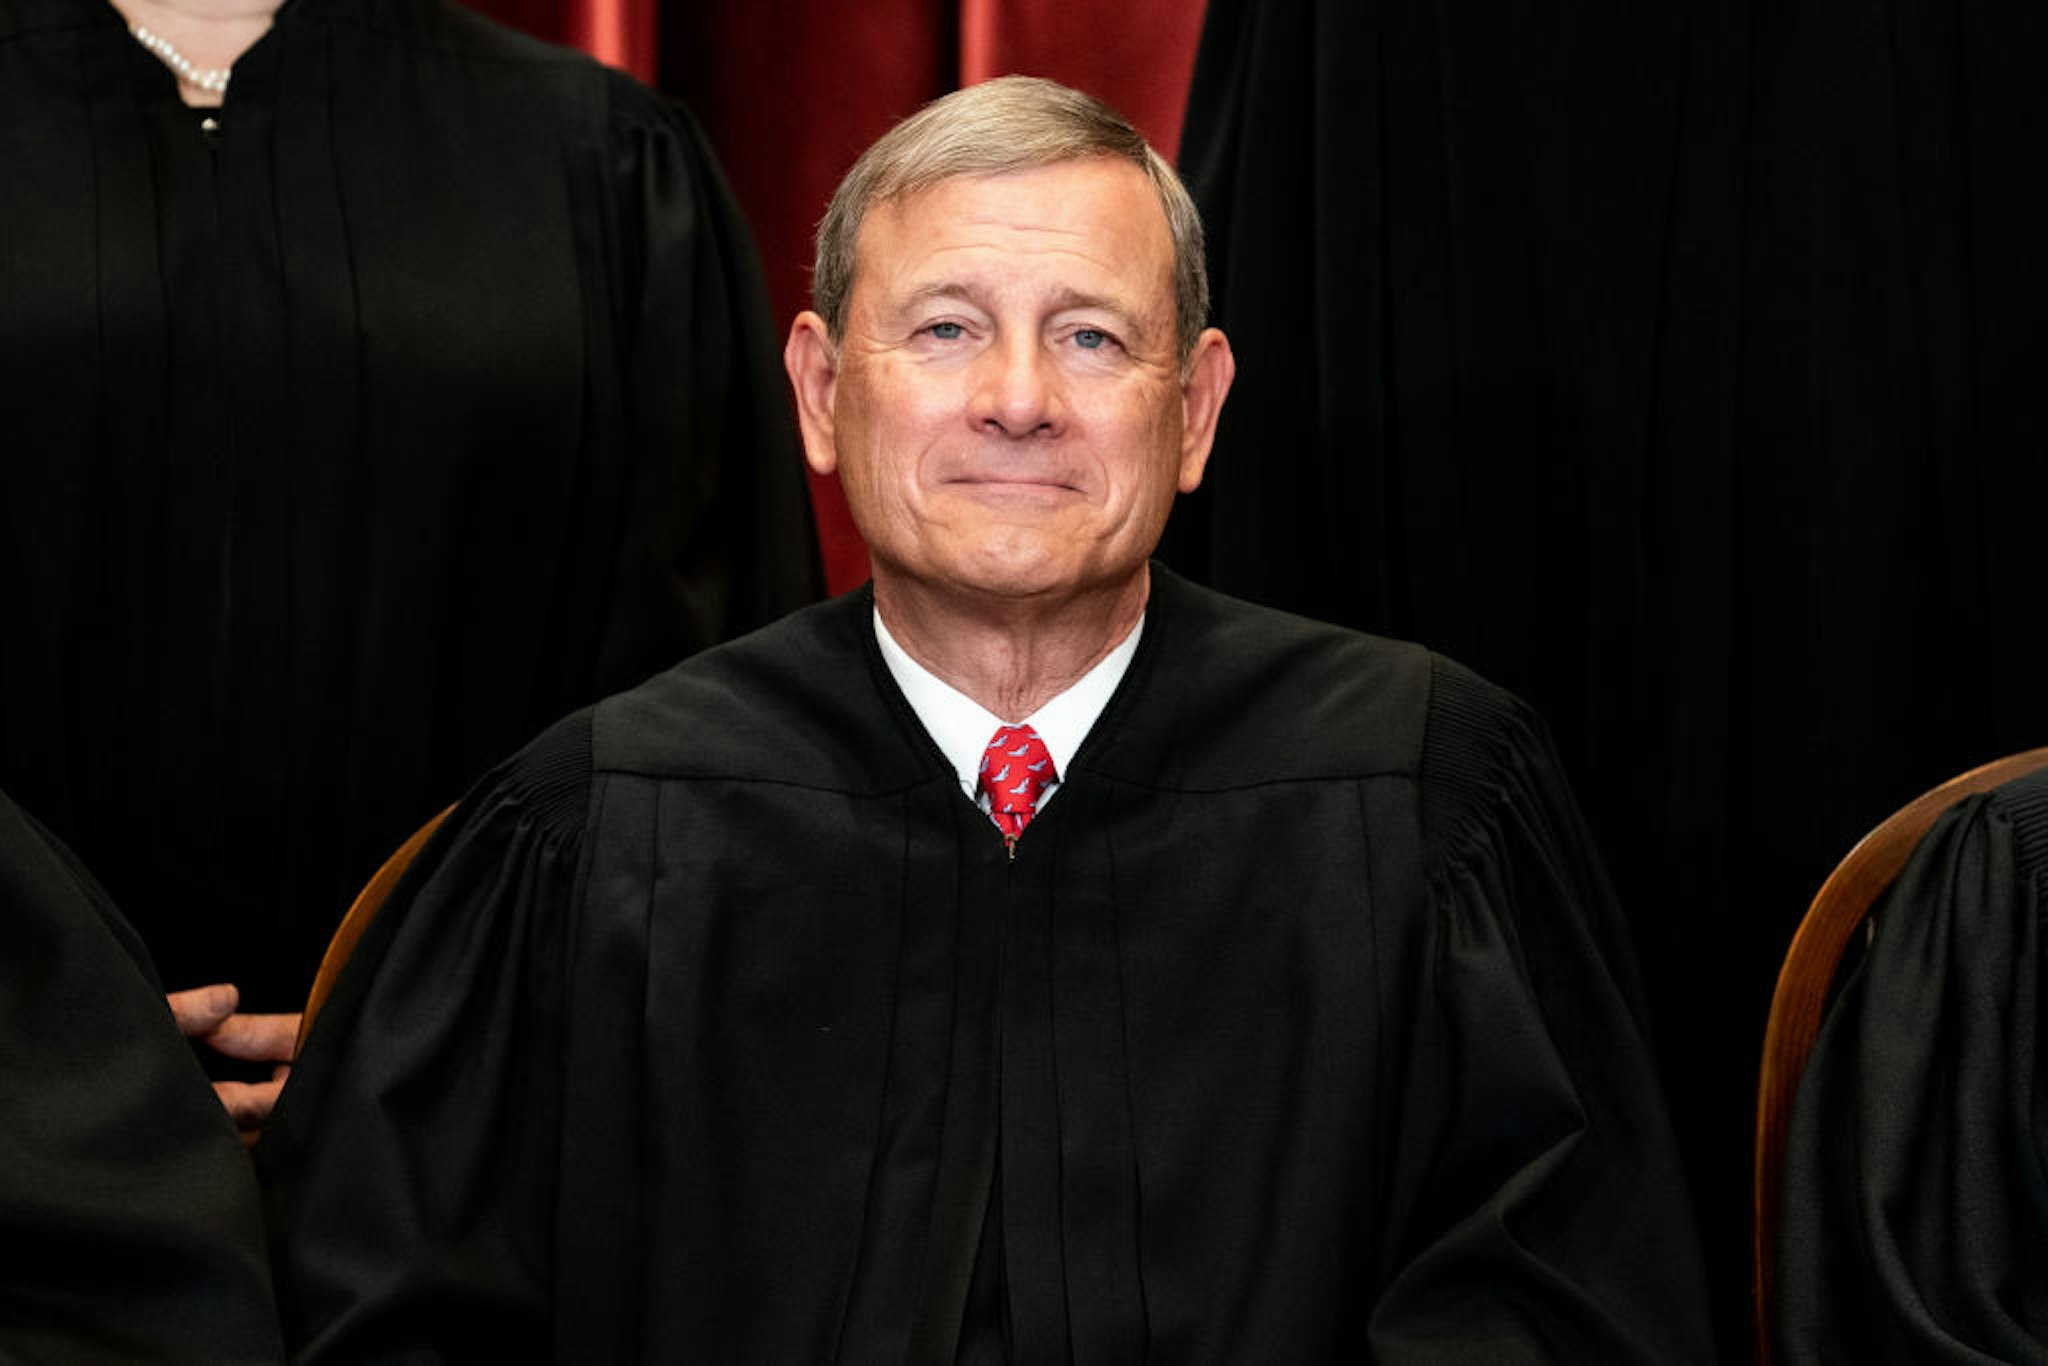 WASHINGTON, DC - APRIL 23: Chief Justice John Roberts sits during a group photo of the Justices at the Supreme Court in Washington, DC on April 23, 2021. (Photo by Erin Schaff-Pool/Getty Images)